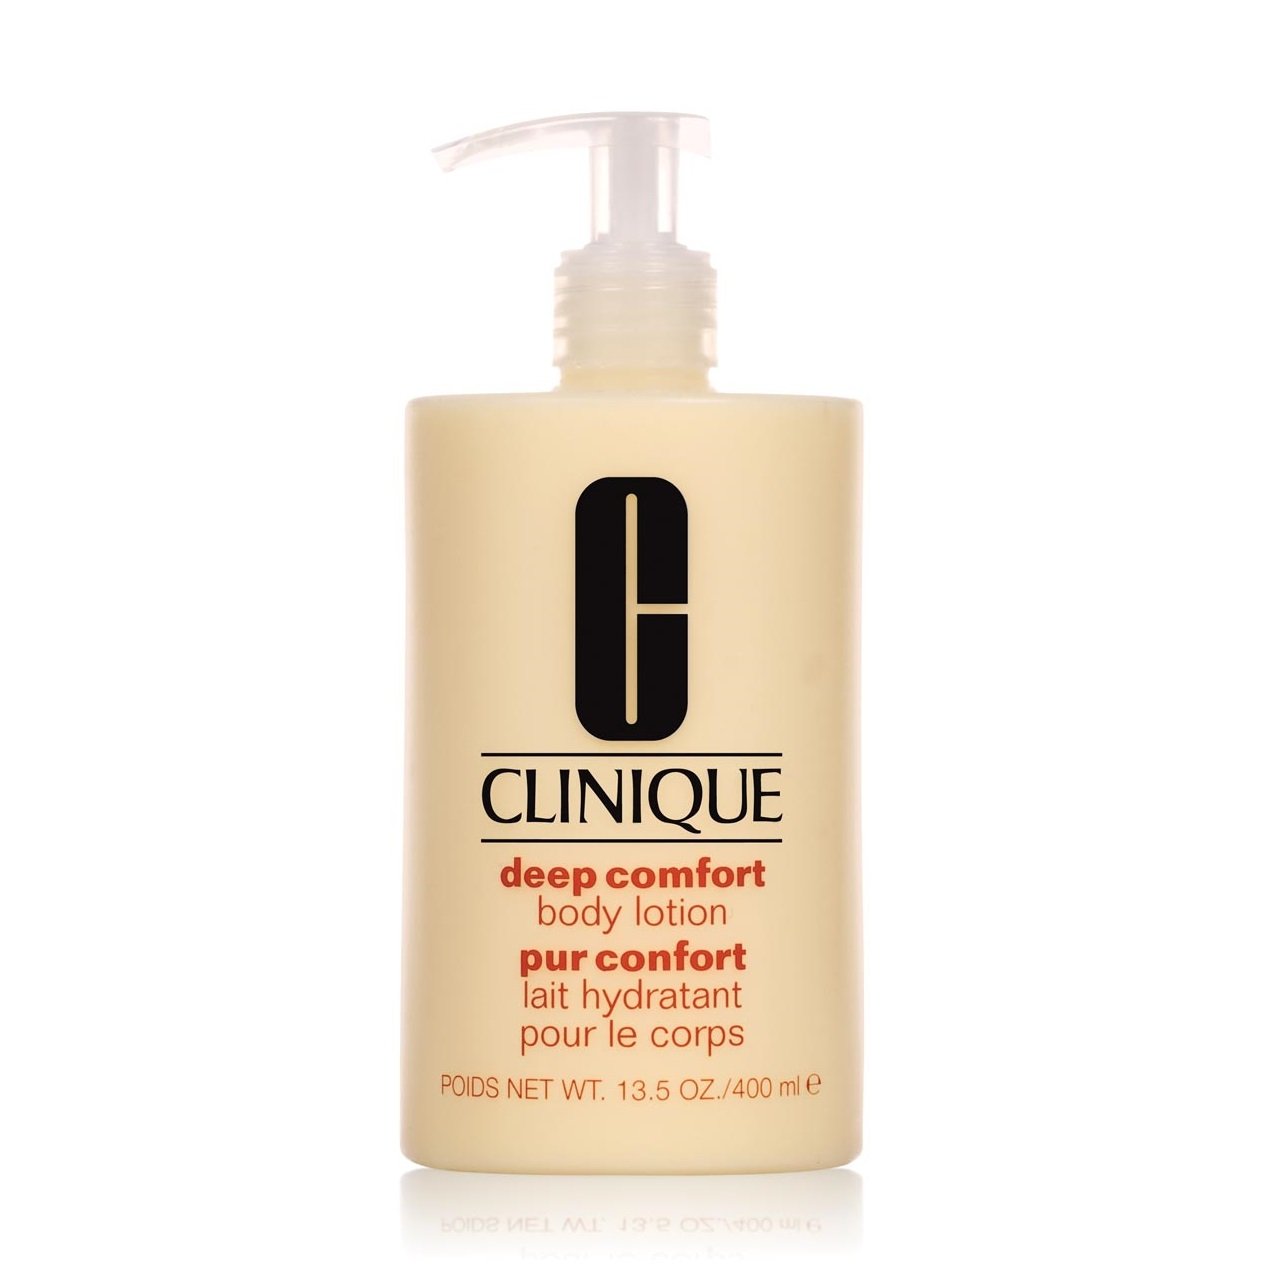 Buy Clinique - Deep Comfort Body Lotion - 400 ml